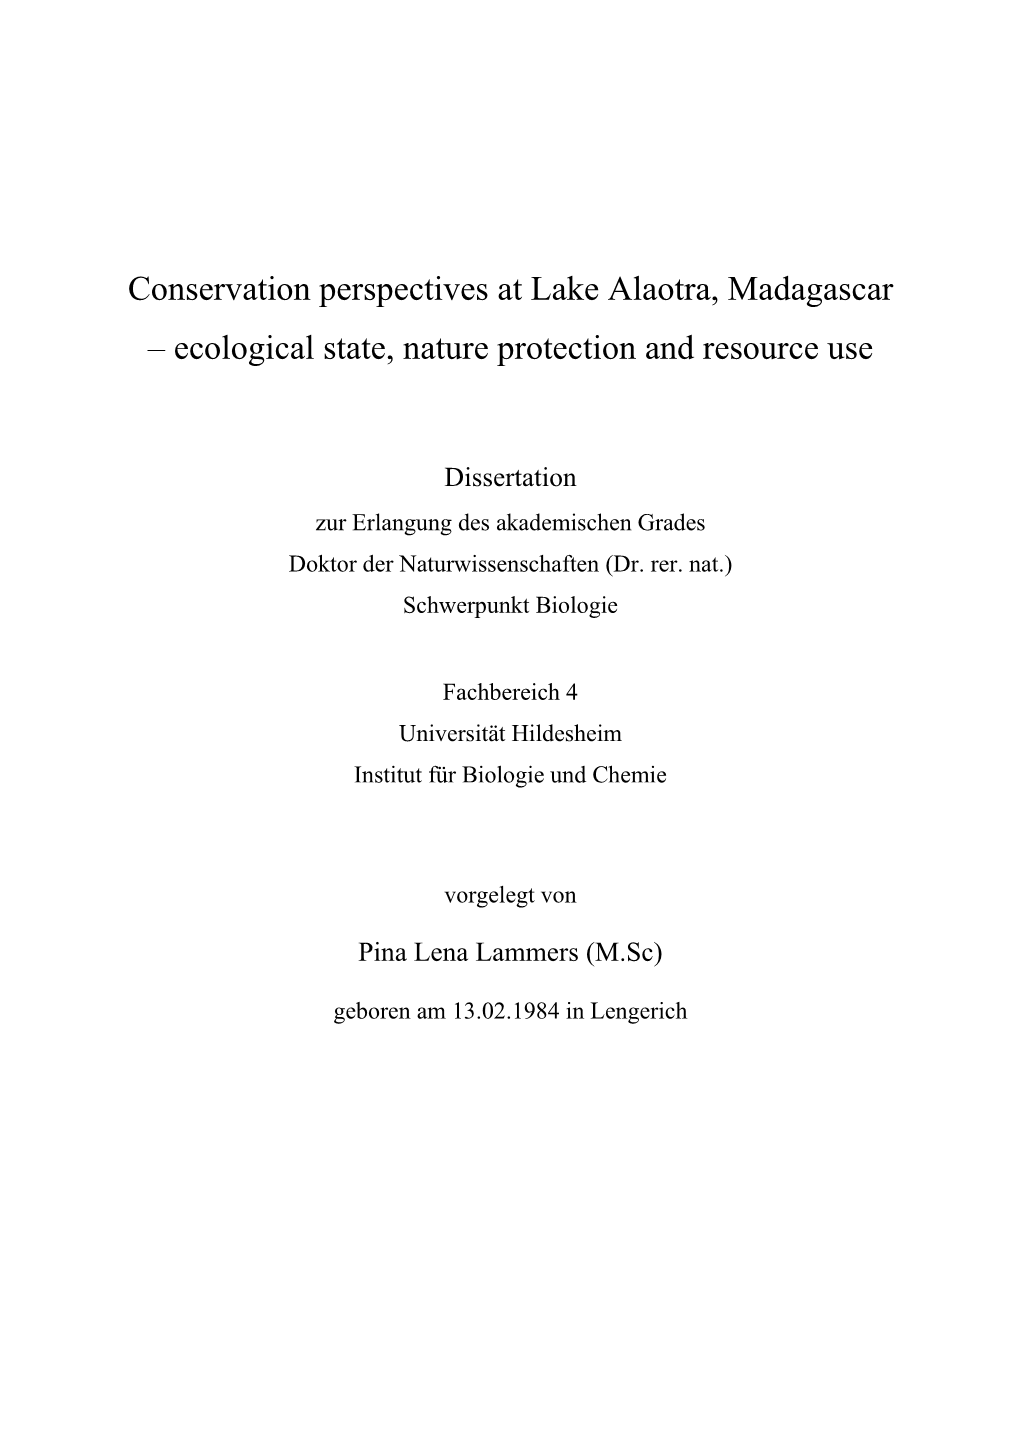 Conservation Perspectives at Lake Alaotra, Madagascar – Ecological State, Nature Protection and Resource Use